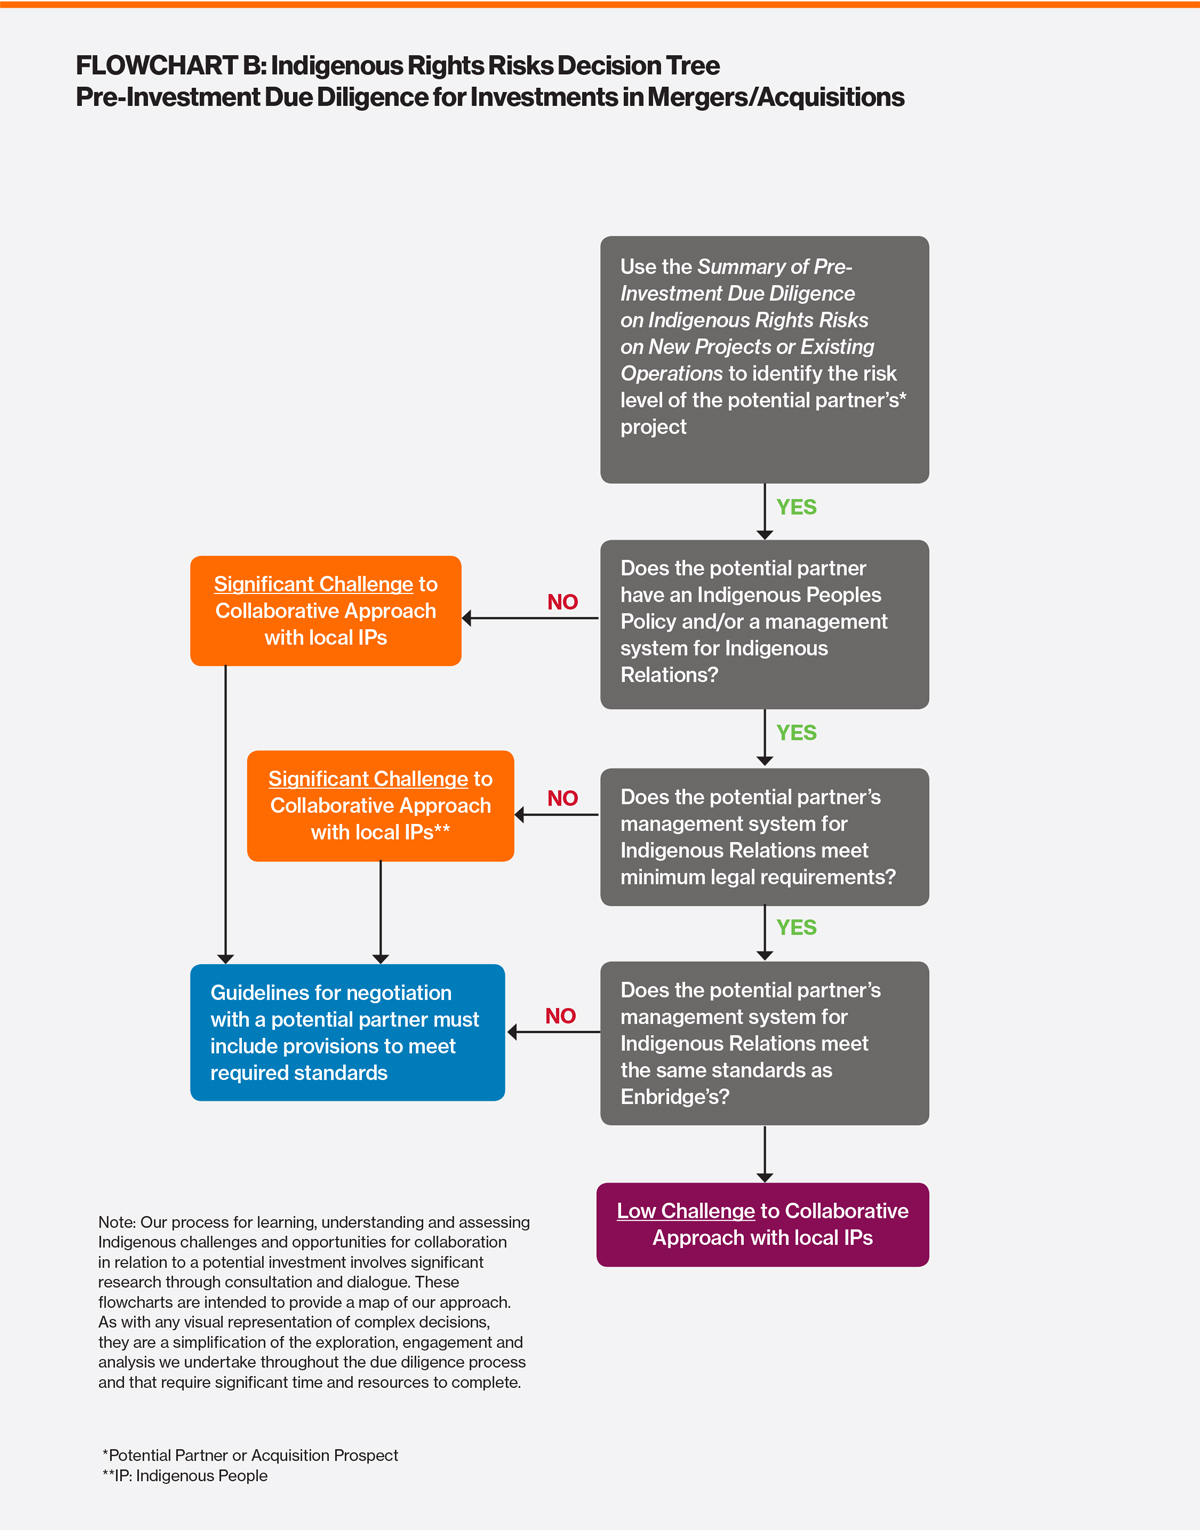 Flowchart B: Summary of Pre-Investment Dude Diligence on New Projects or Existing Operations